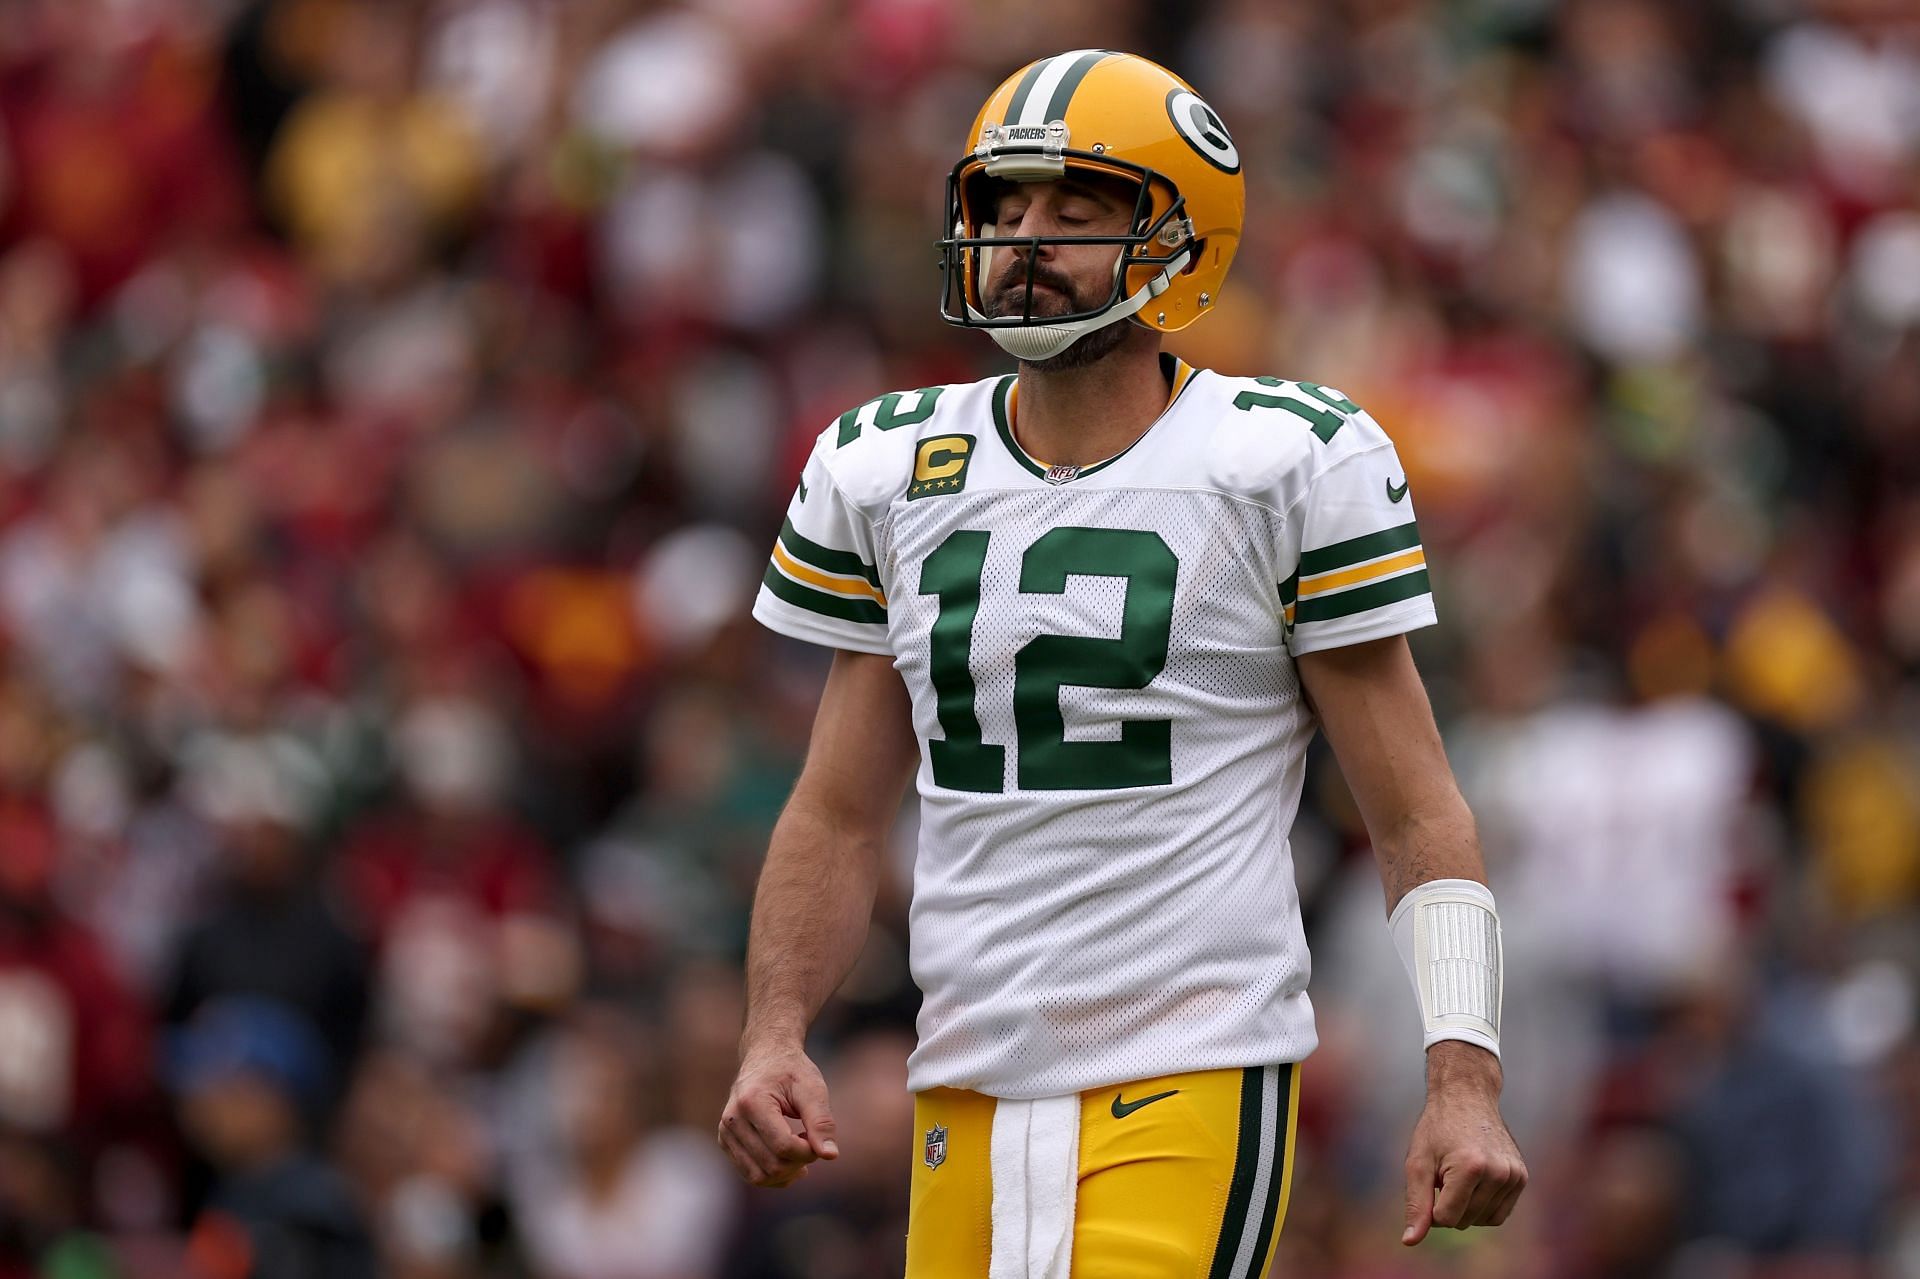 Aaron Rodgers could wear Joe Namath's iconic 12 jersey if plays